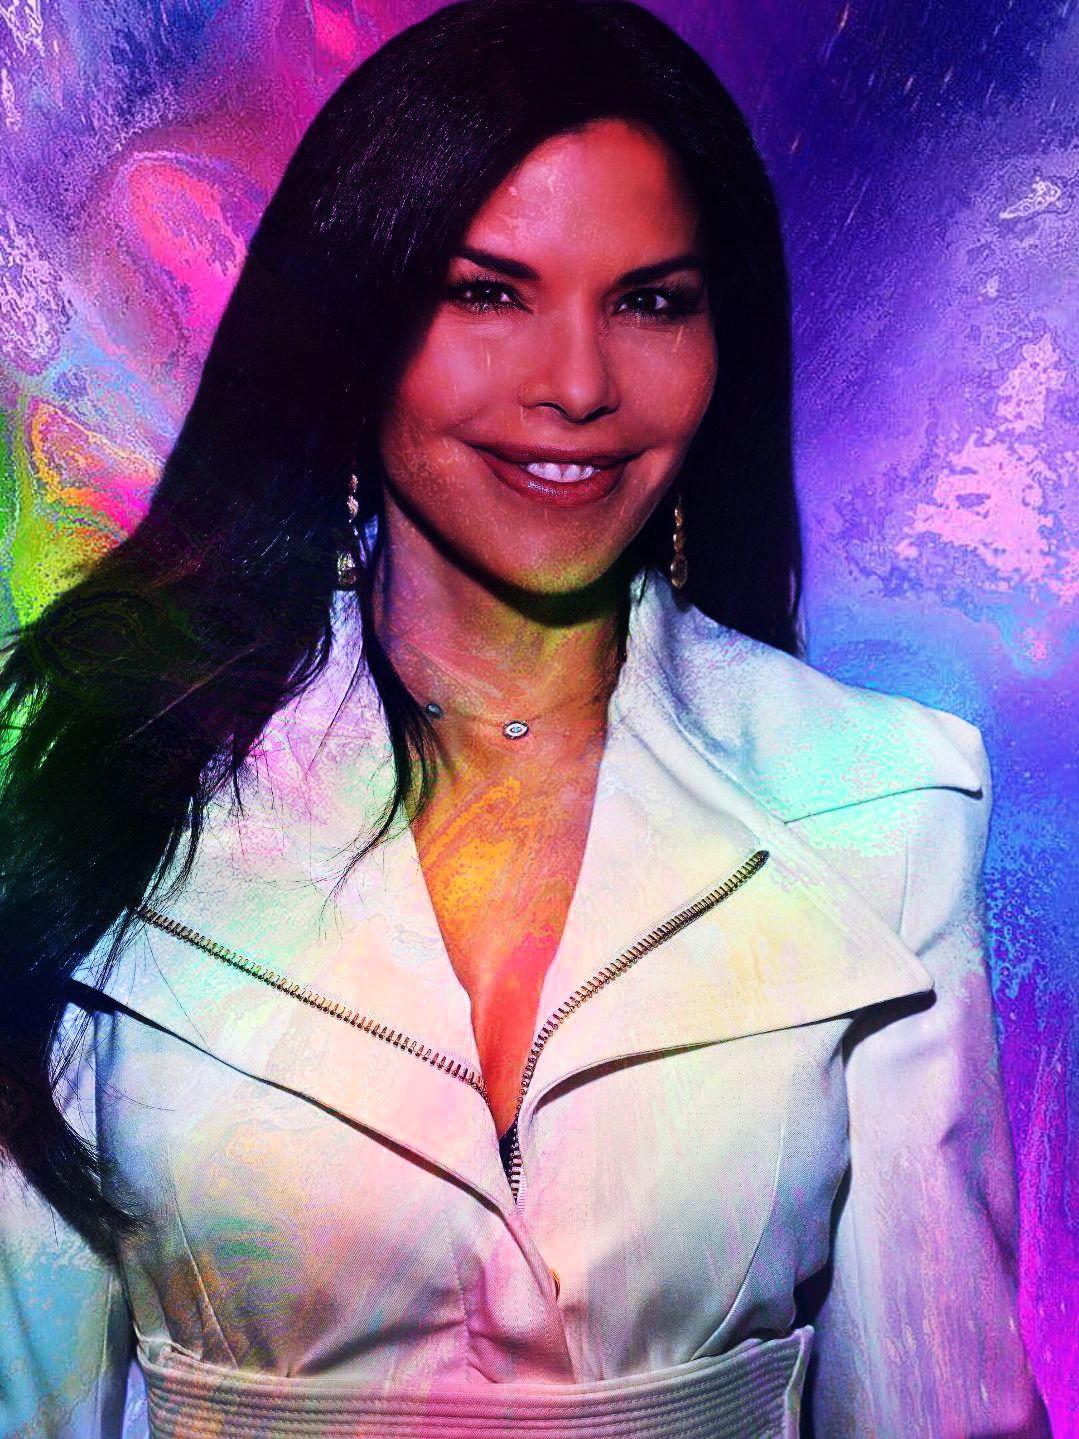 Son Tried To Rape Fuck Very Hungry Sex Mom In Side Hd Hq - Lauren Sanchez # 4 - Celeb ART - Beautiful Artworks of Celebrities,  Footballers, Politicians and Famous People in World | OpenSea